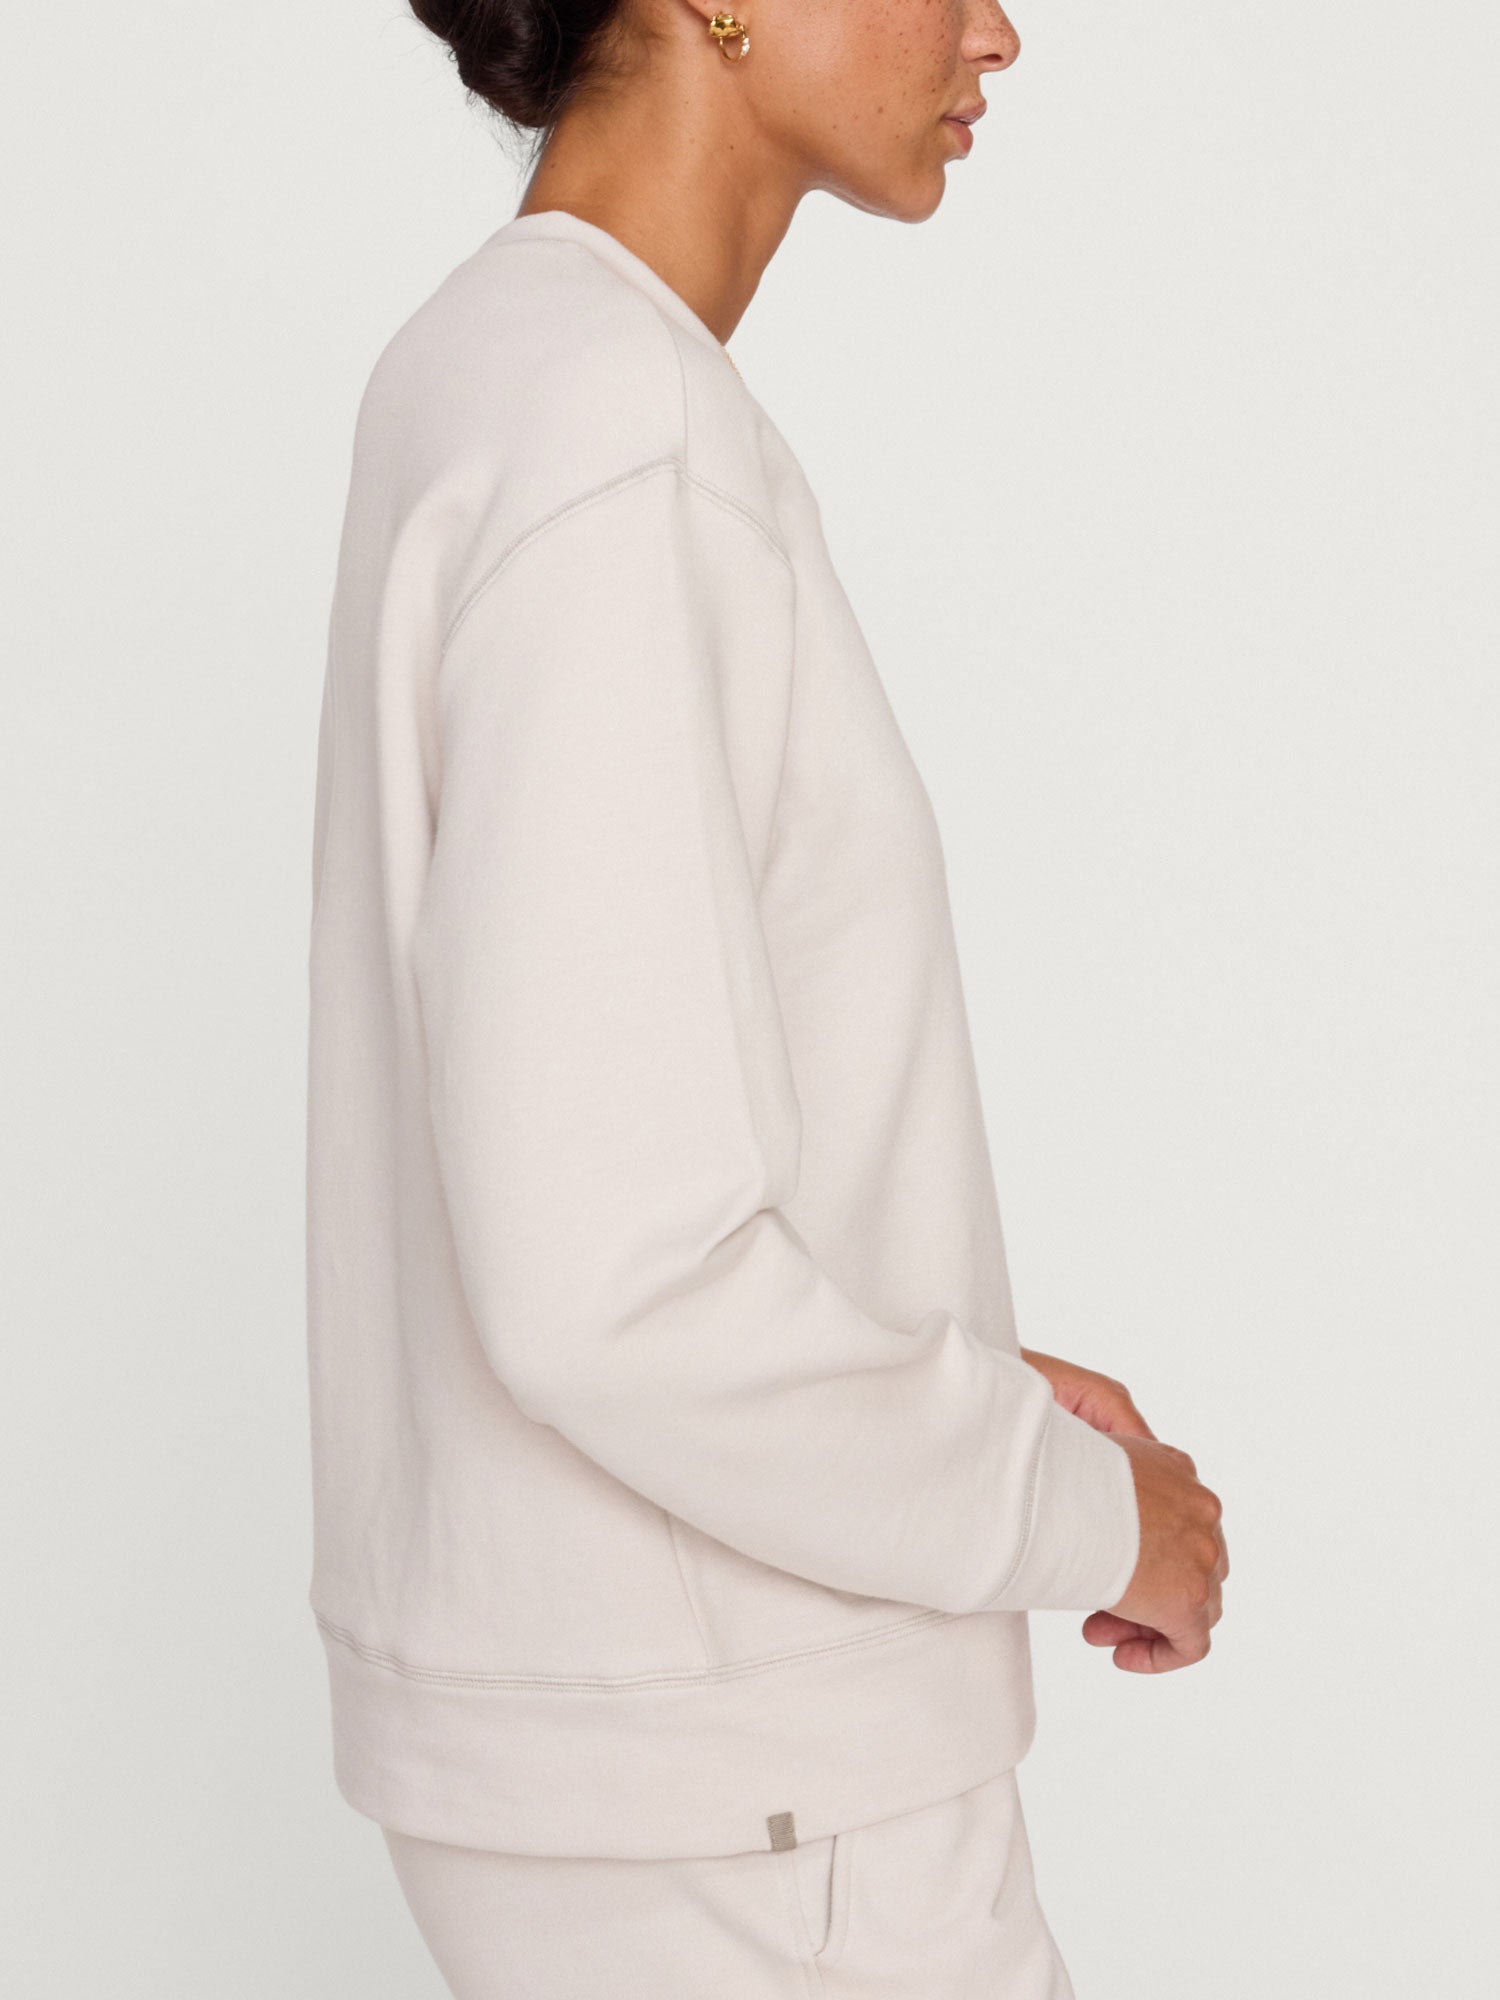 Mallo French Terry off-white pullover sweatshirt side view